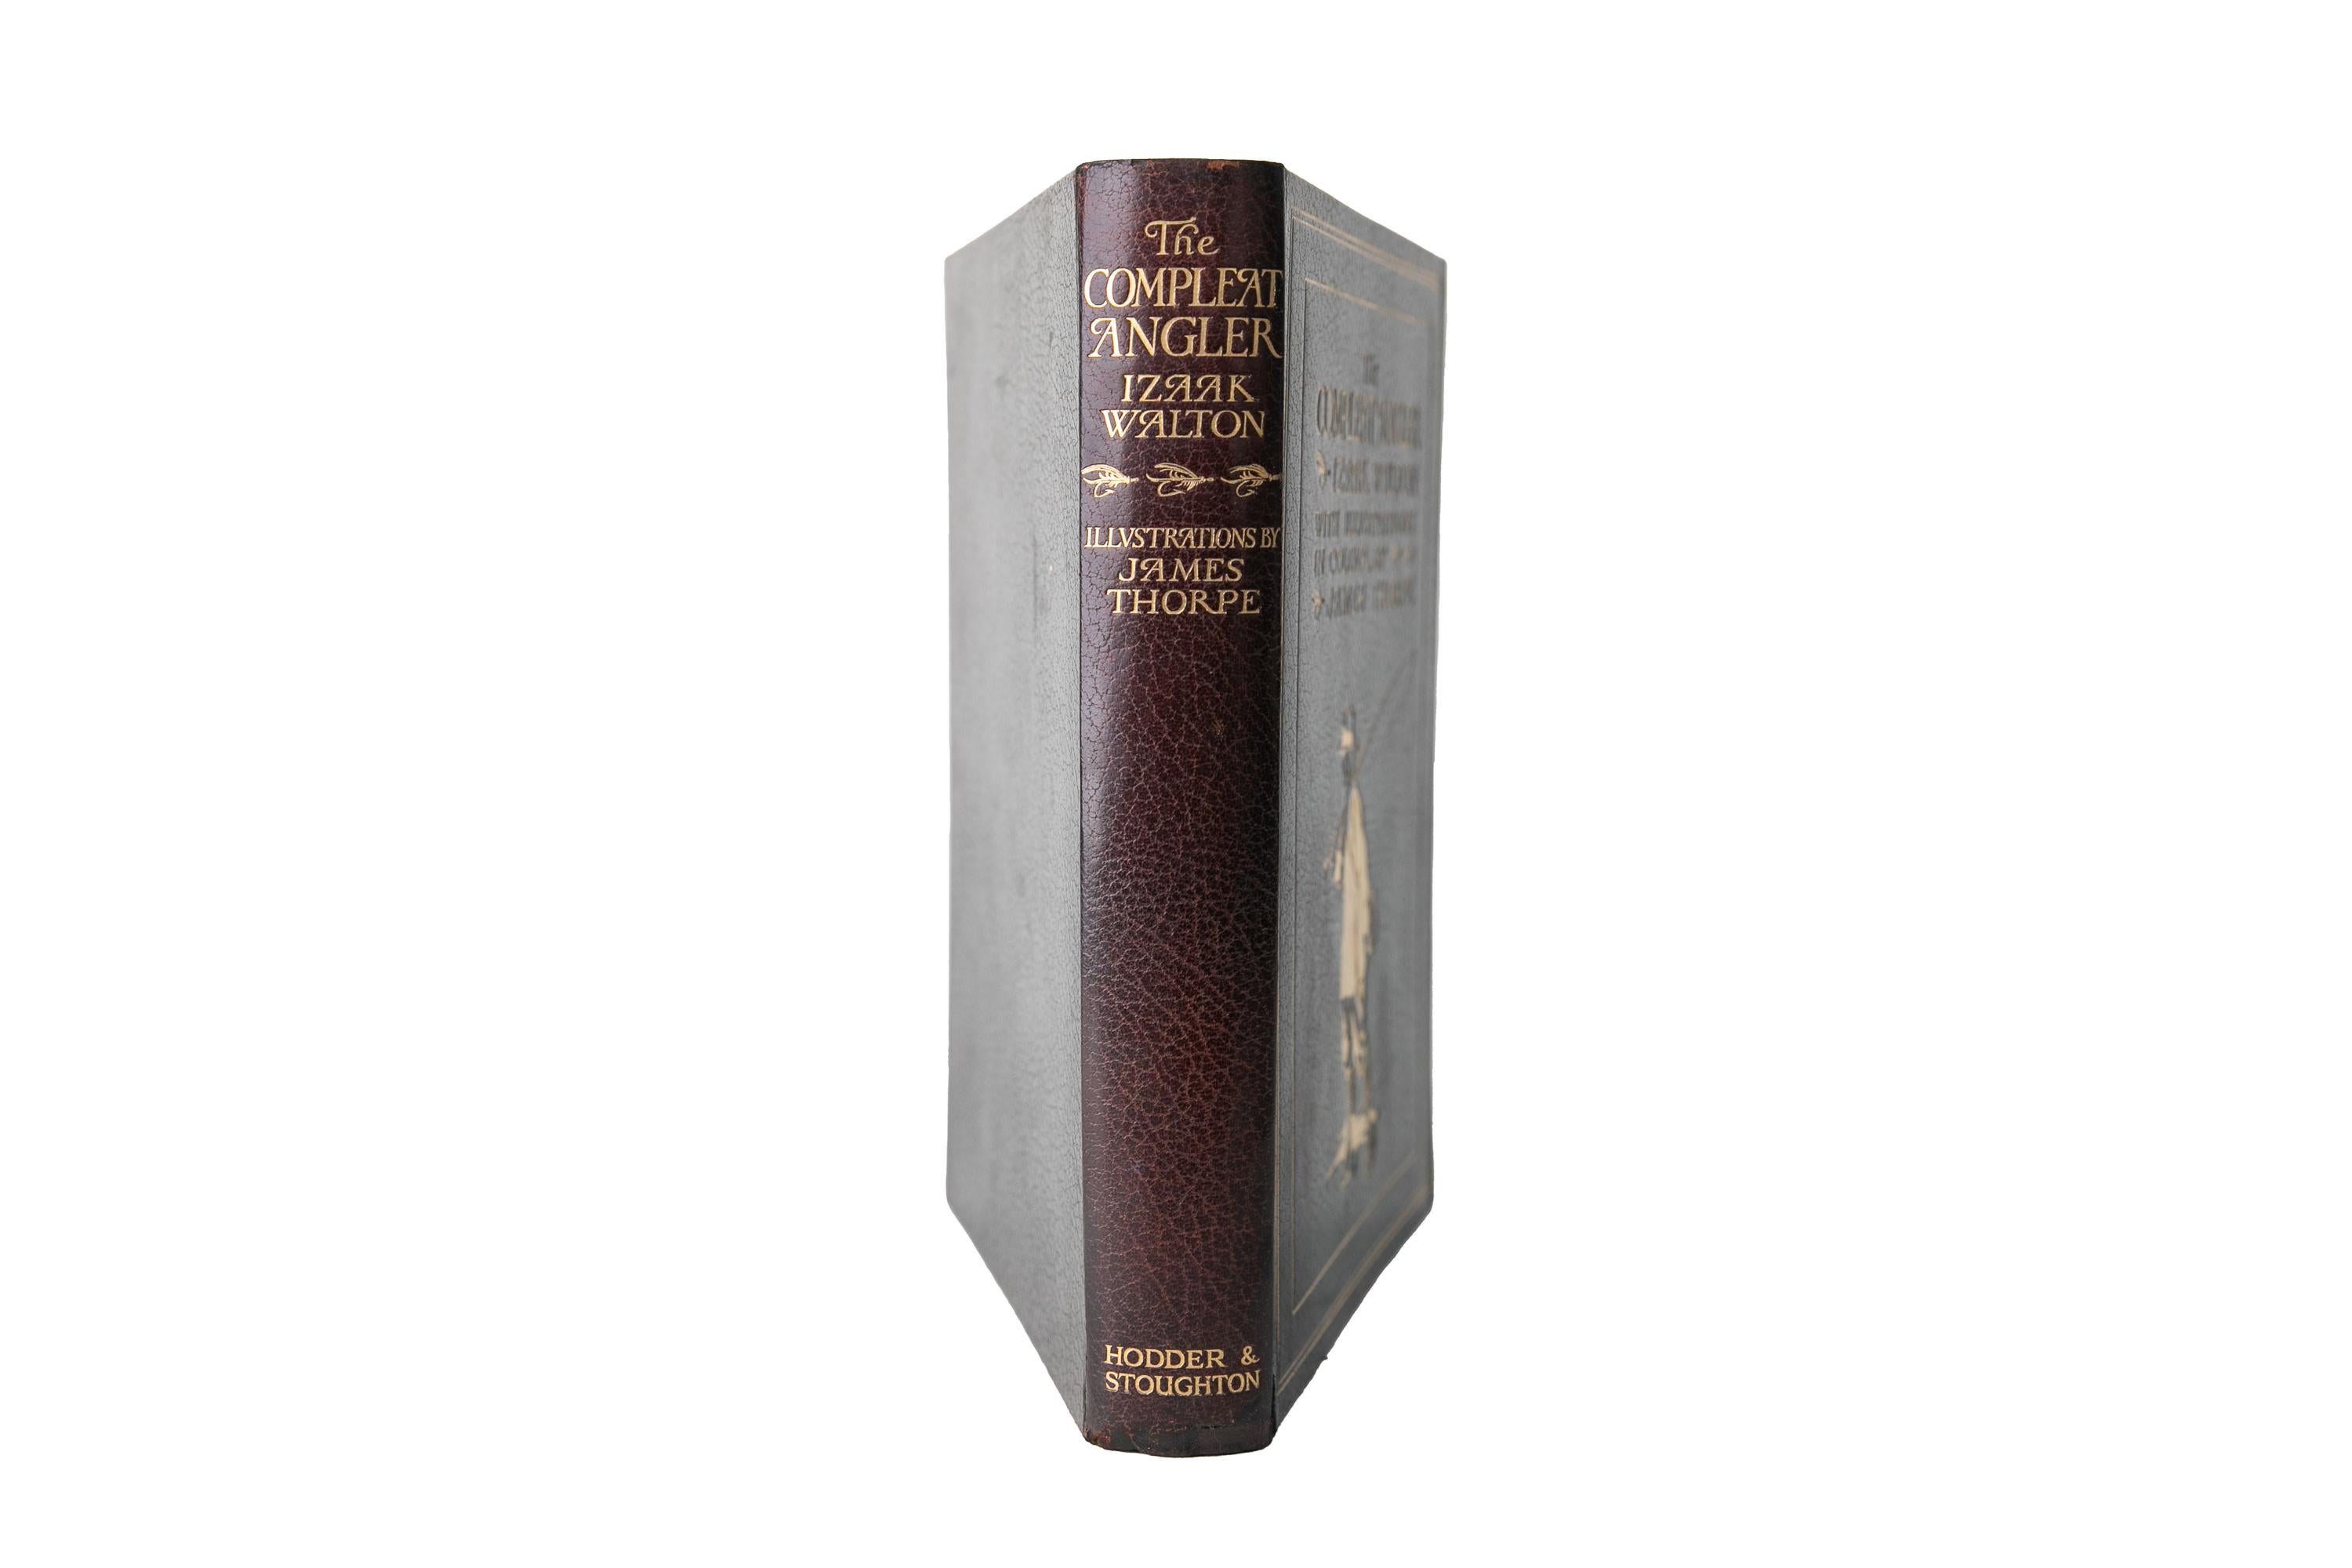 1 Volume. Izaak Walton, The Compleat Angler. For Sale